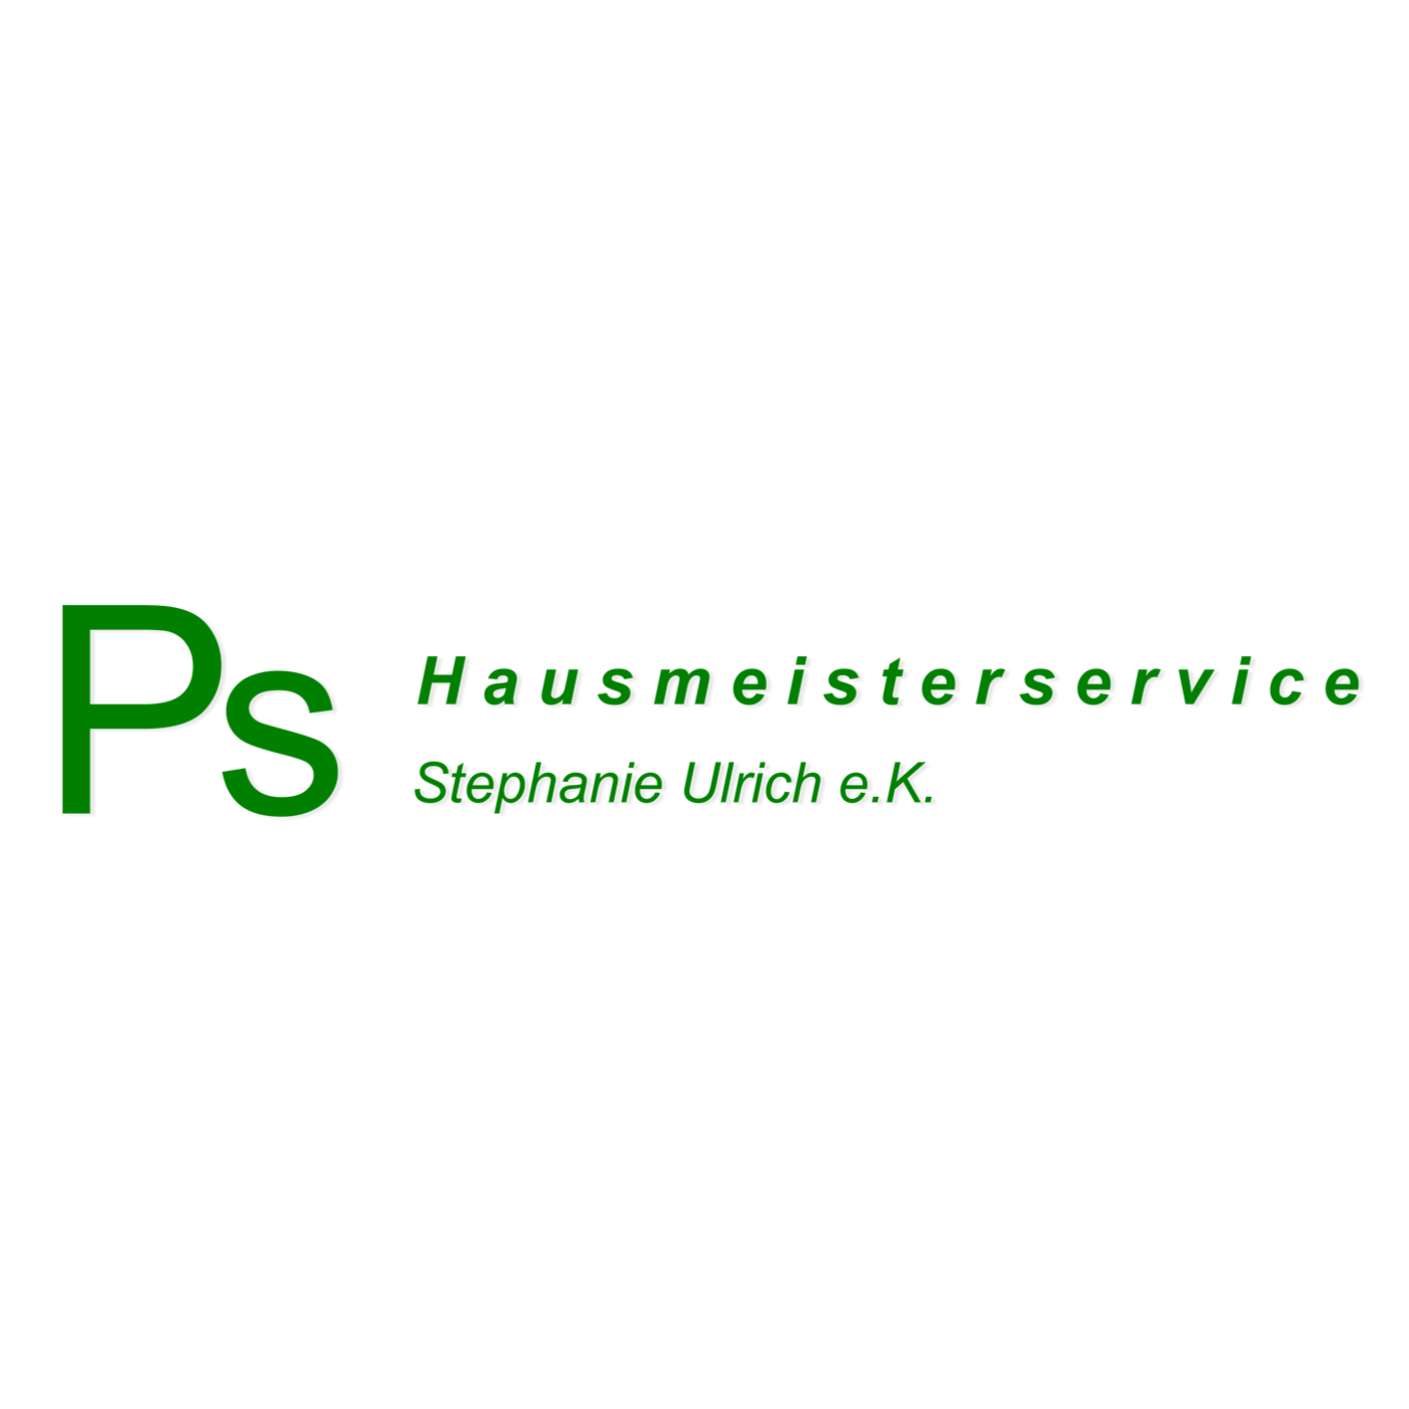 PS Hausmeisterservice  